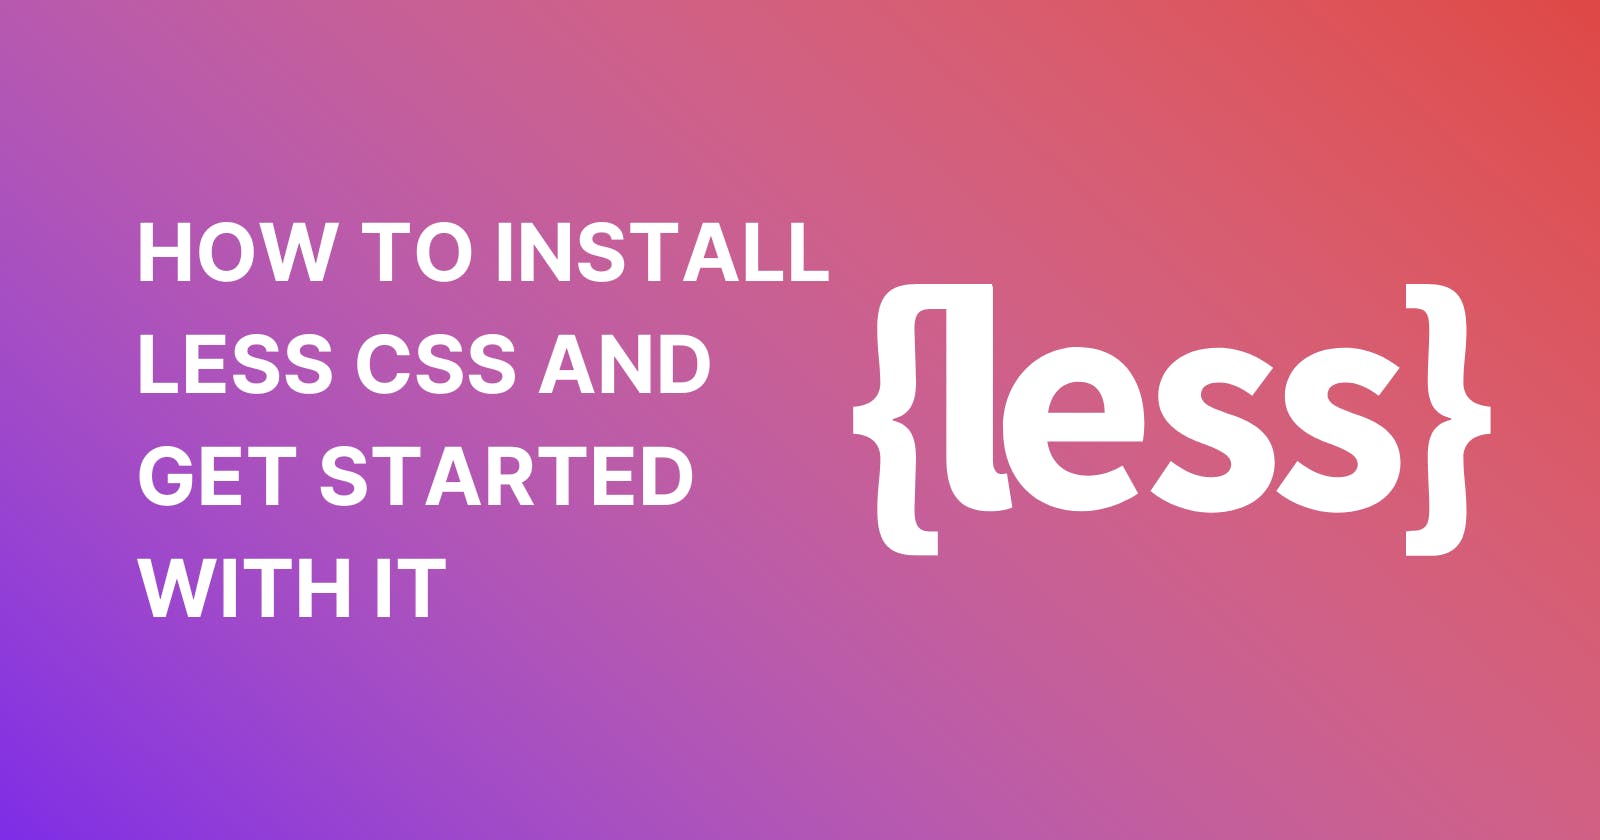 How to Install Less CSS and Get Started with It